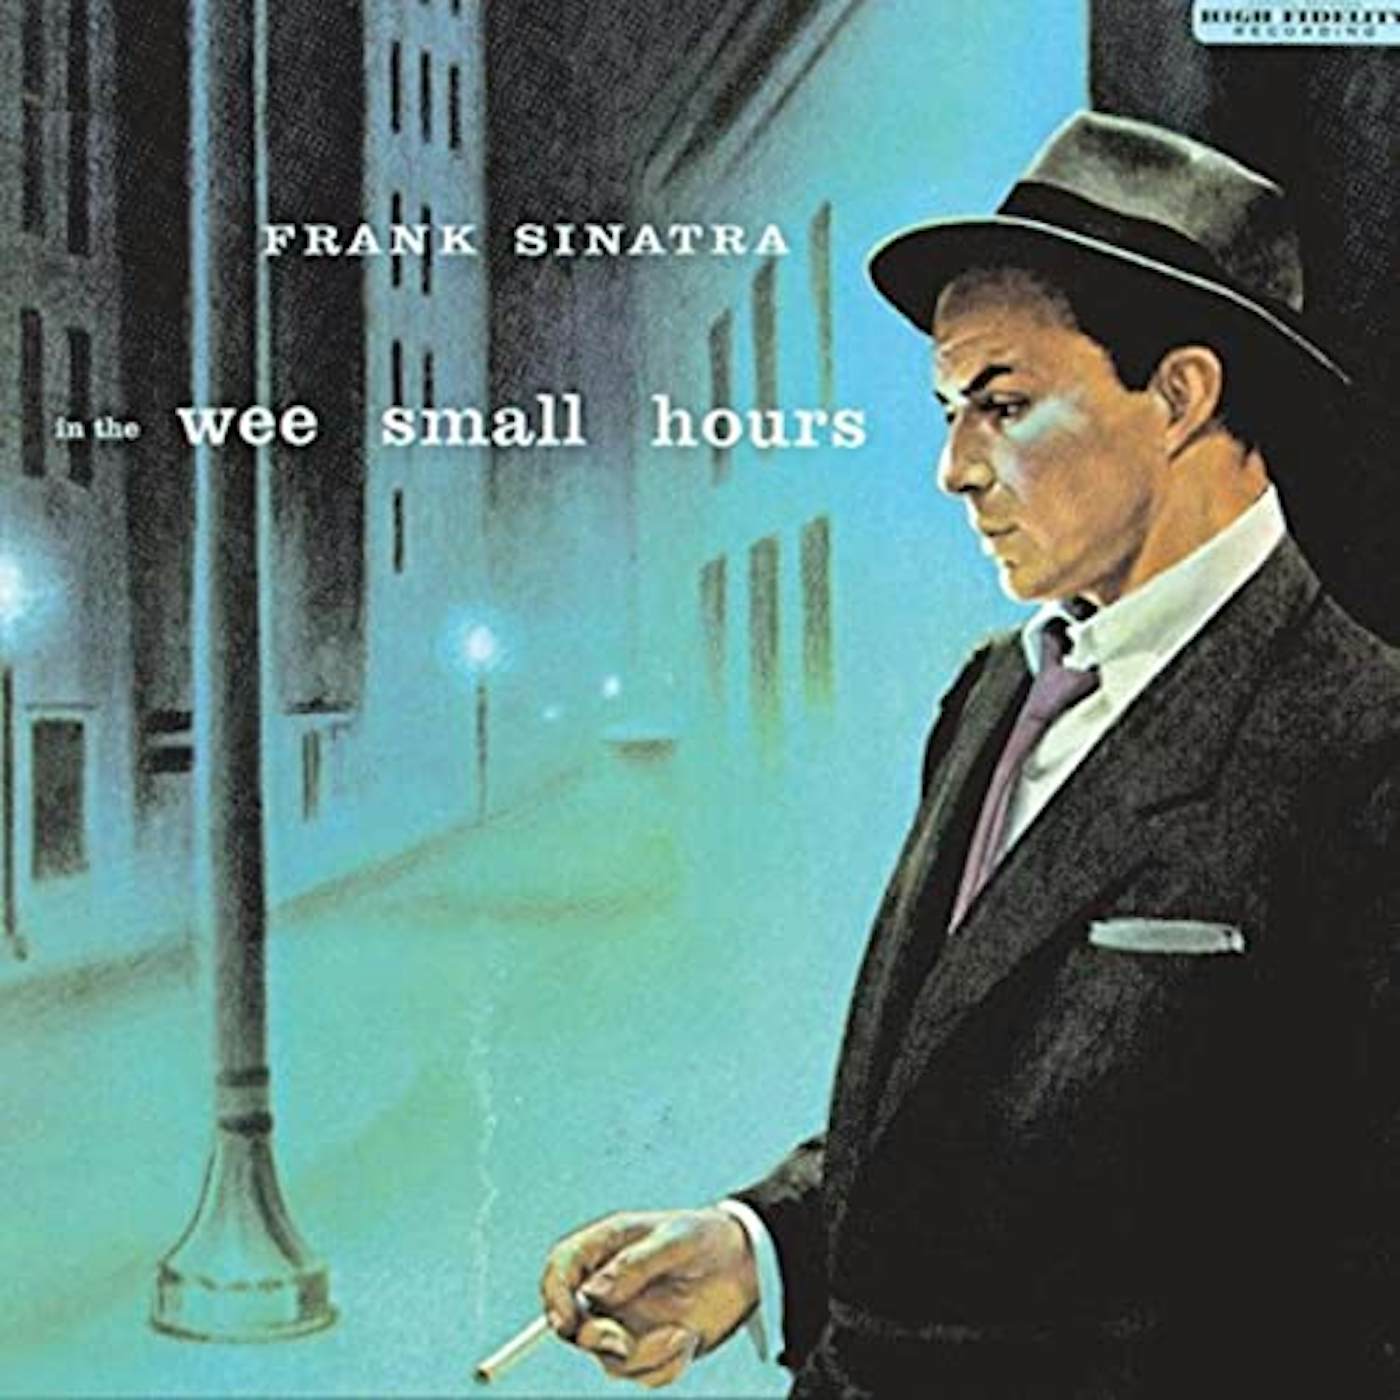 Frank Sinatra In The Wee Small Hours Vinyl Record